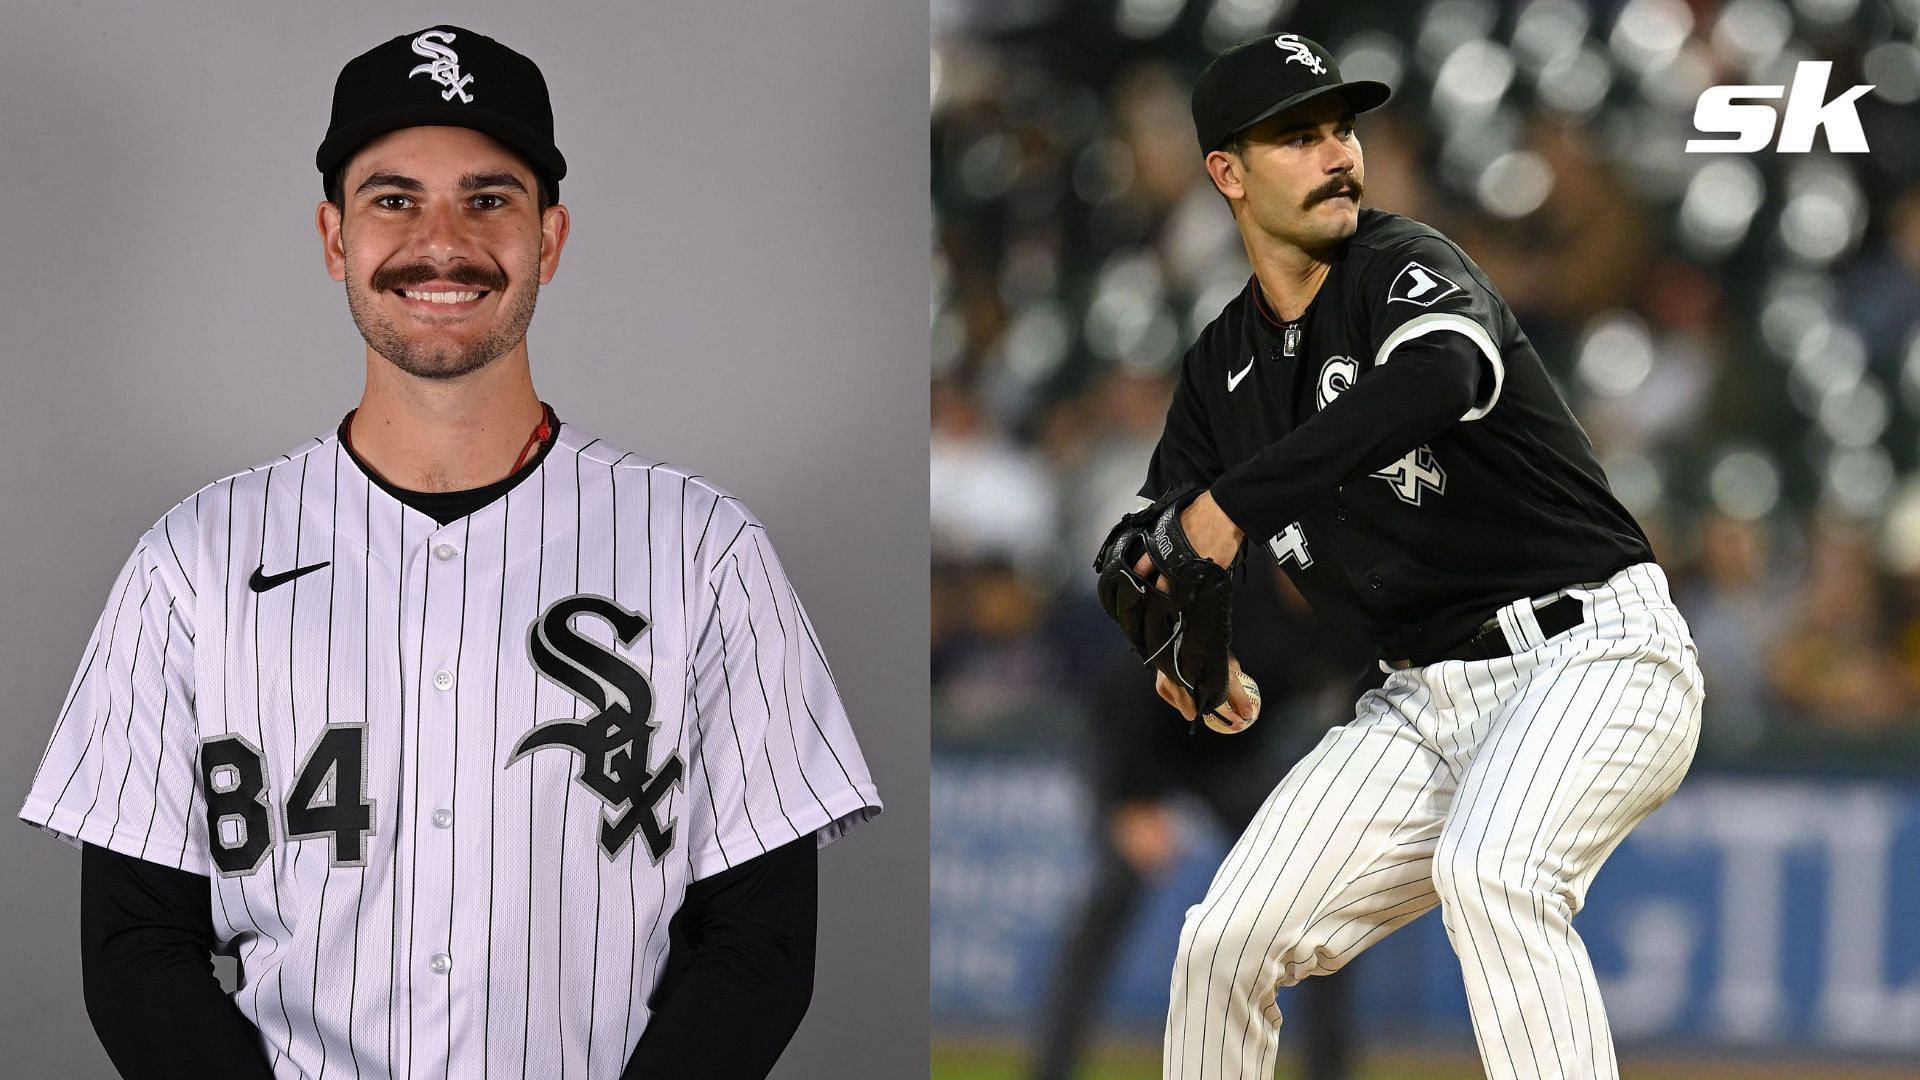 Dylan Cease and the Seattle Mariners could be a match made in heaven if he is traded